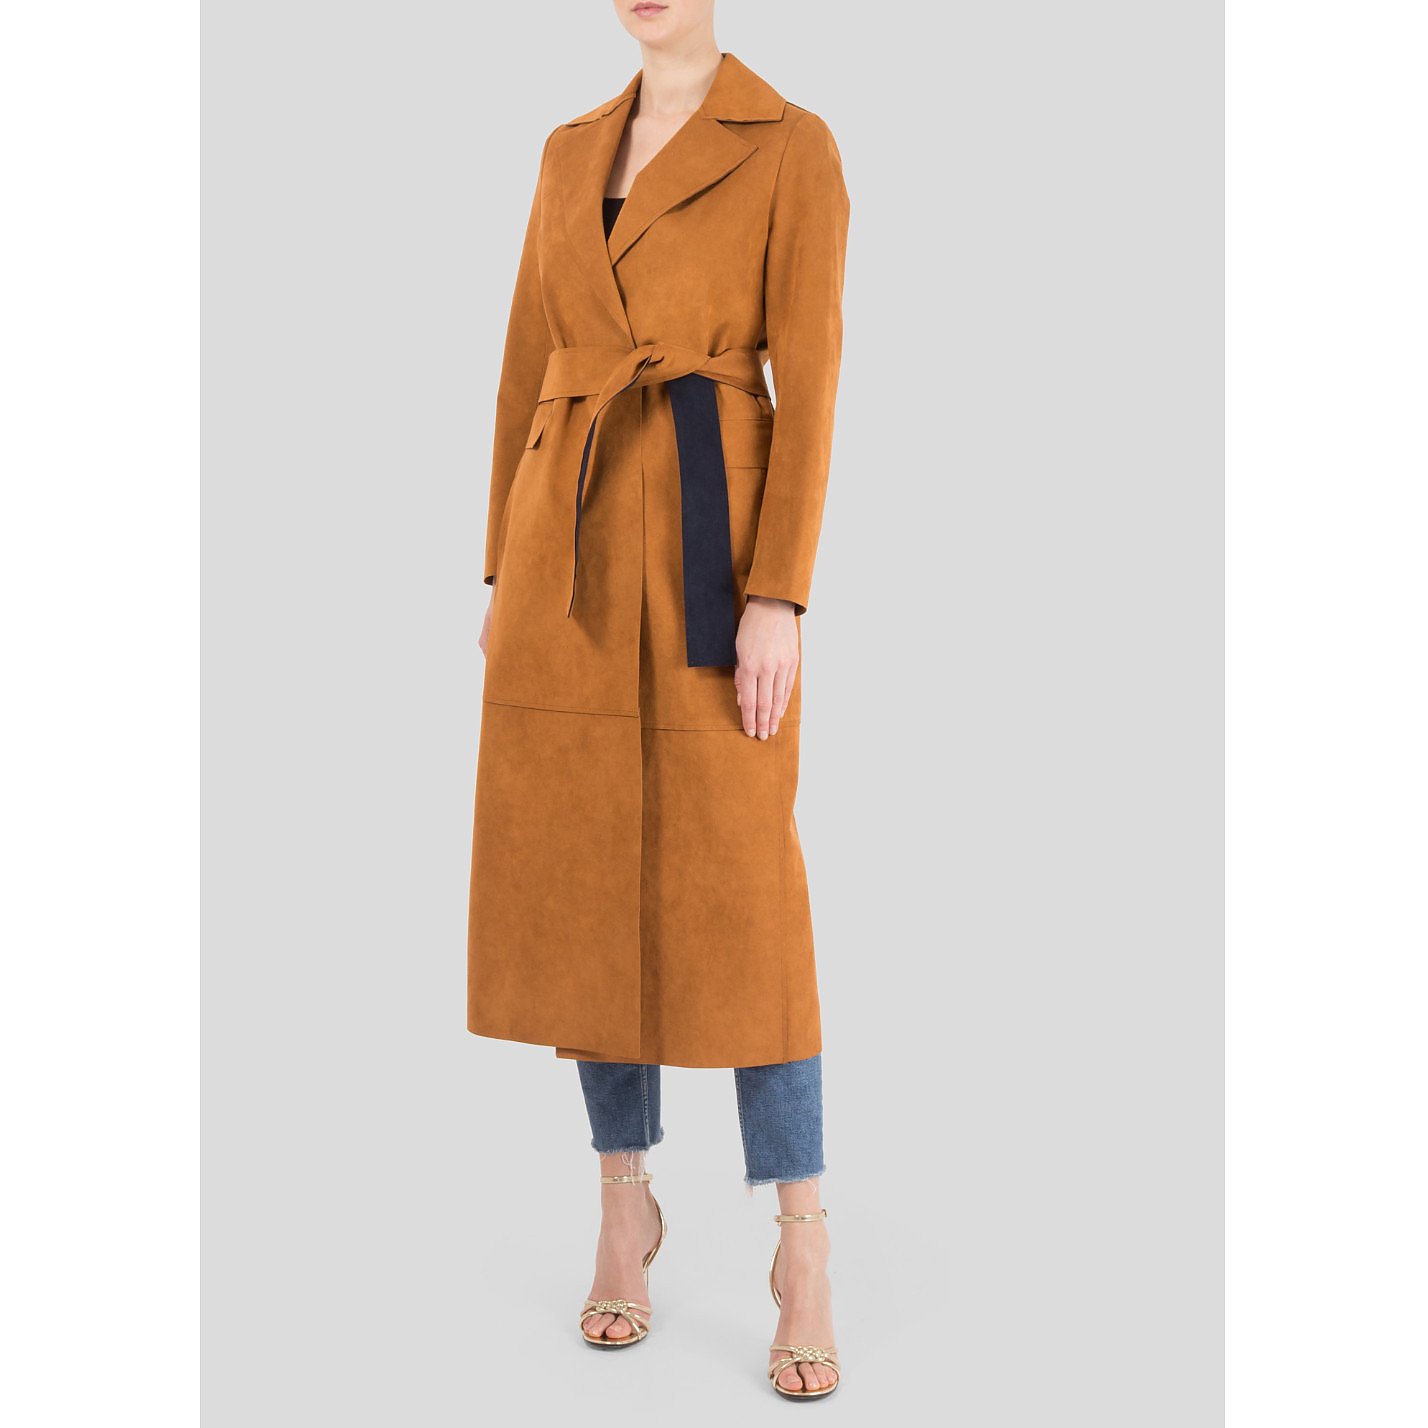 MSGM Faux Suede Trench Coat